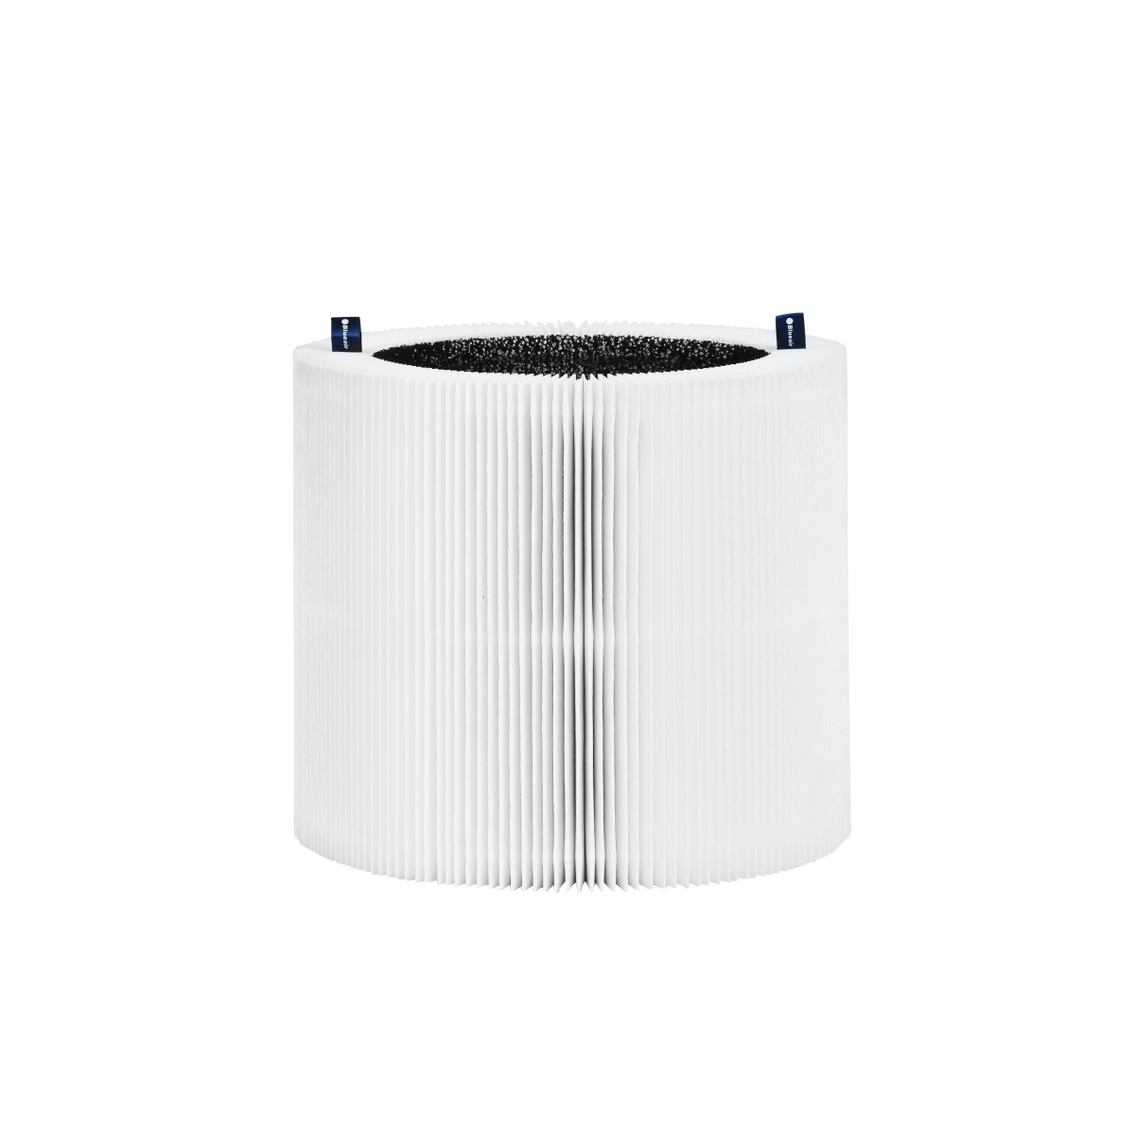 Blueair HEPA Replacement Filter for 311i Max Air Purifier